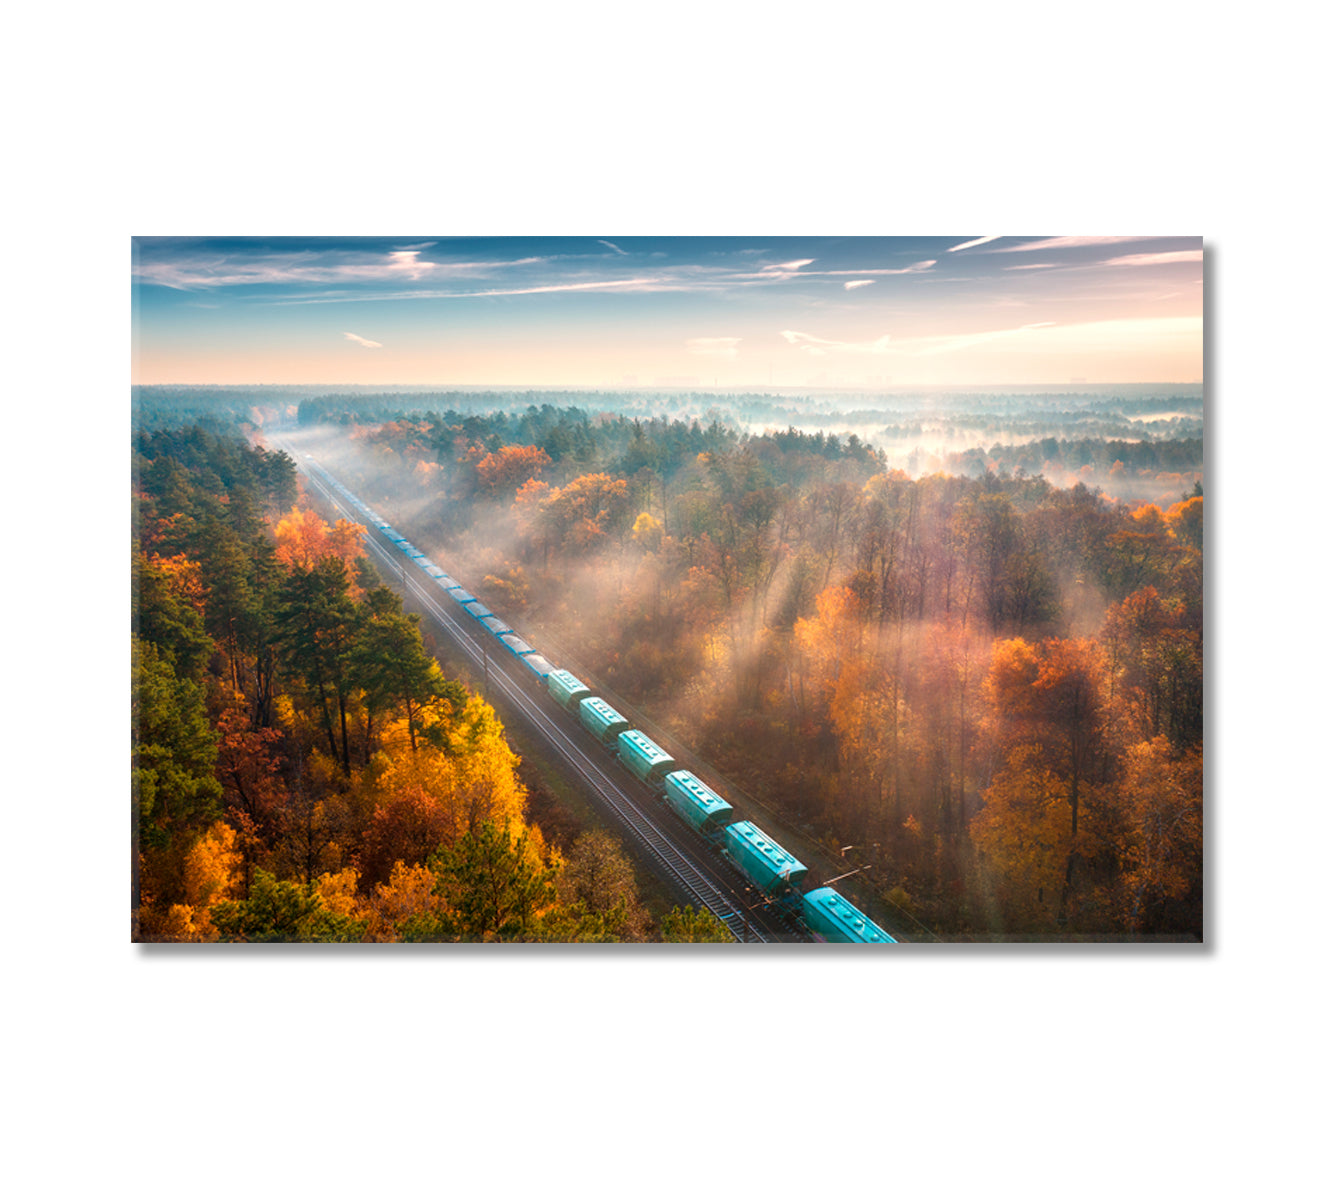 Freight Train in Beautiful Autumn Foggy Forest Canvas Print-Canvas Print-CetArt-1 Panel-24x16 inches-CetArt